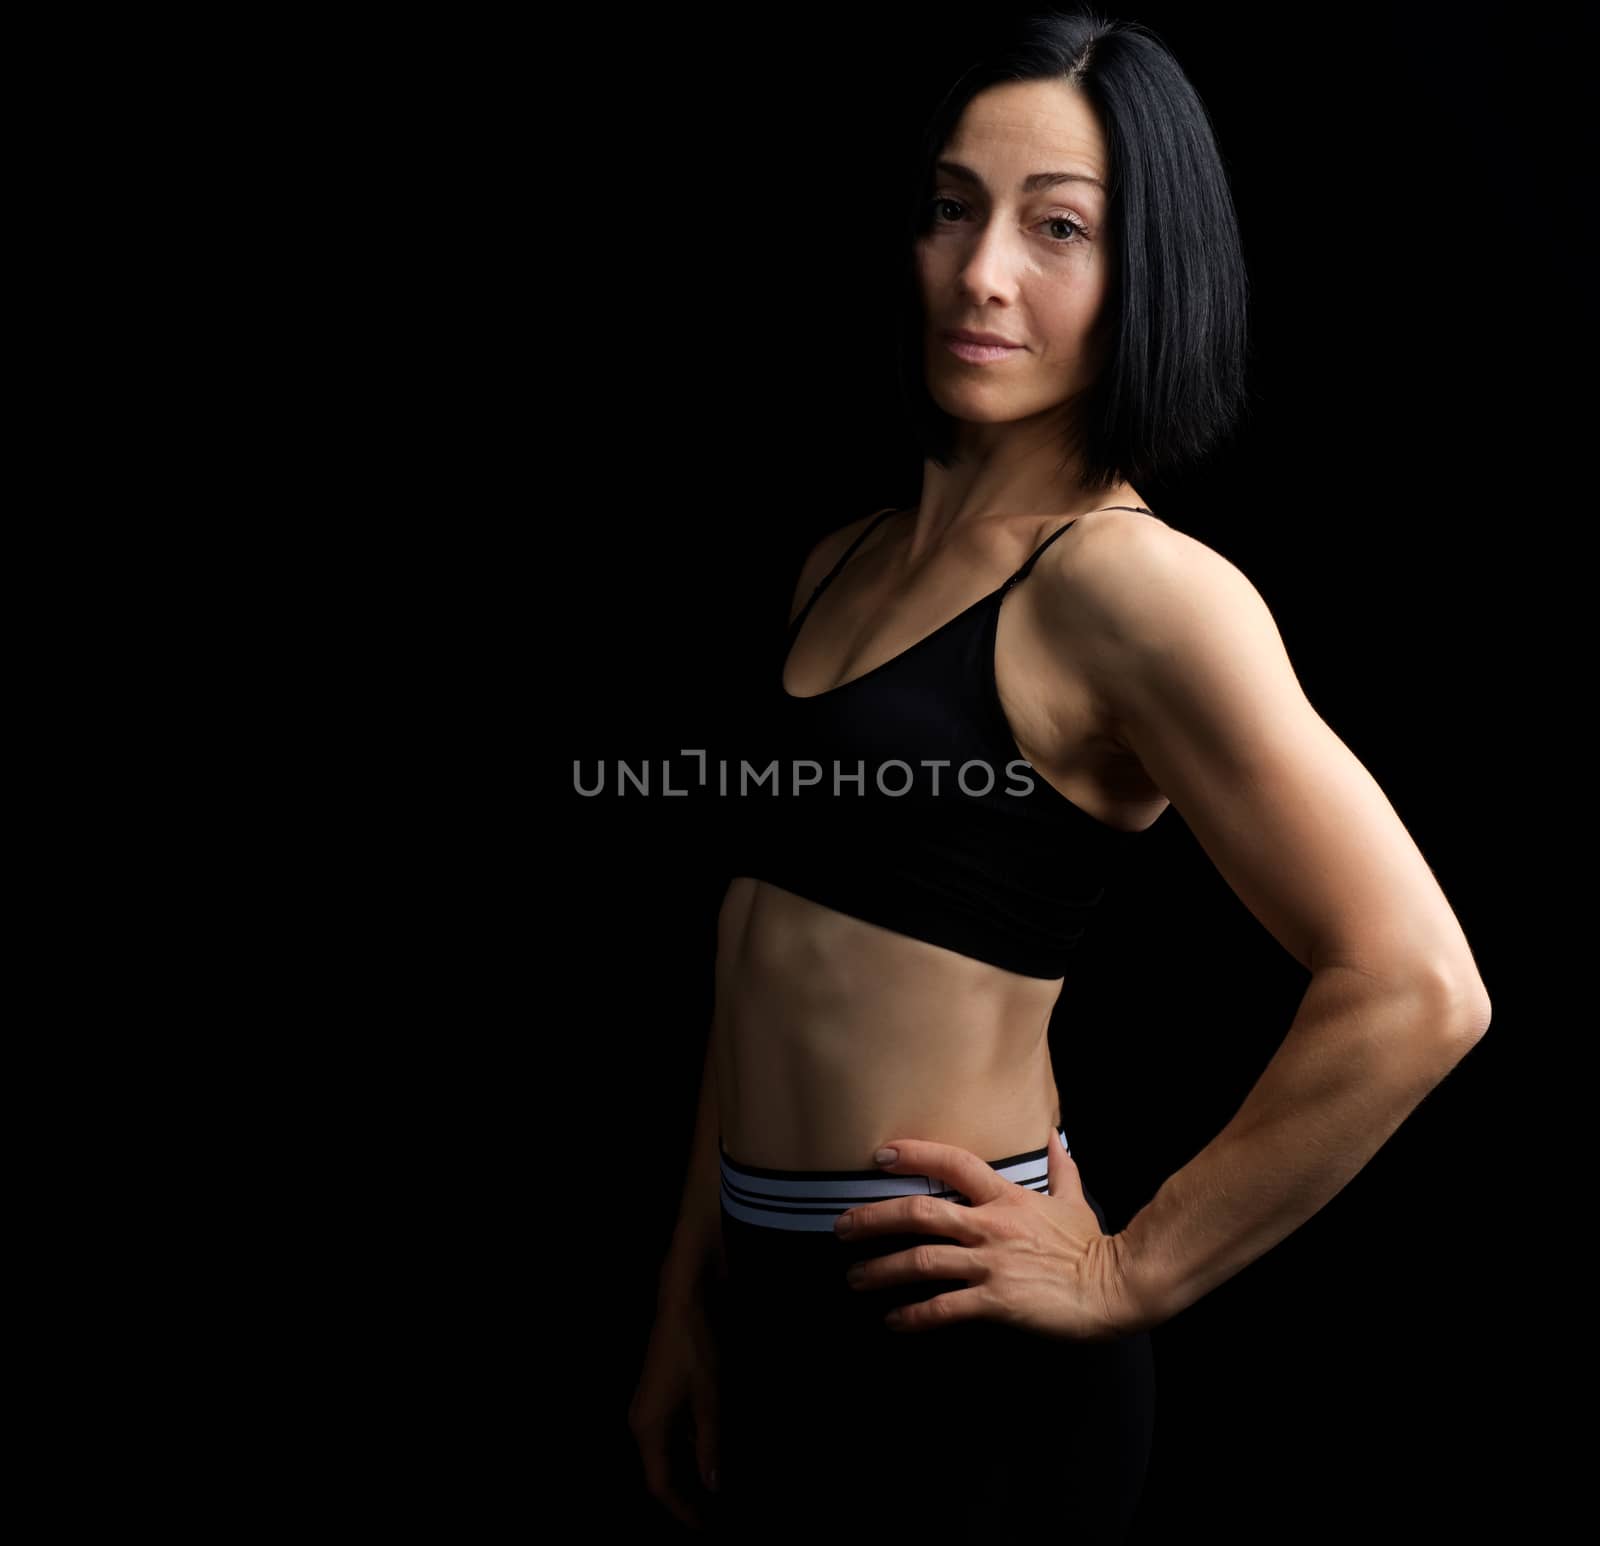 Adult girl with a sports figure in black bra and black shorts standing on a dark background, muscular body, black hair, low key